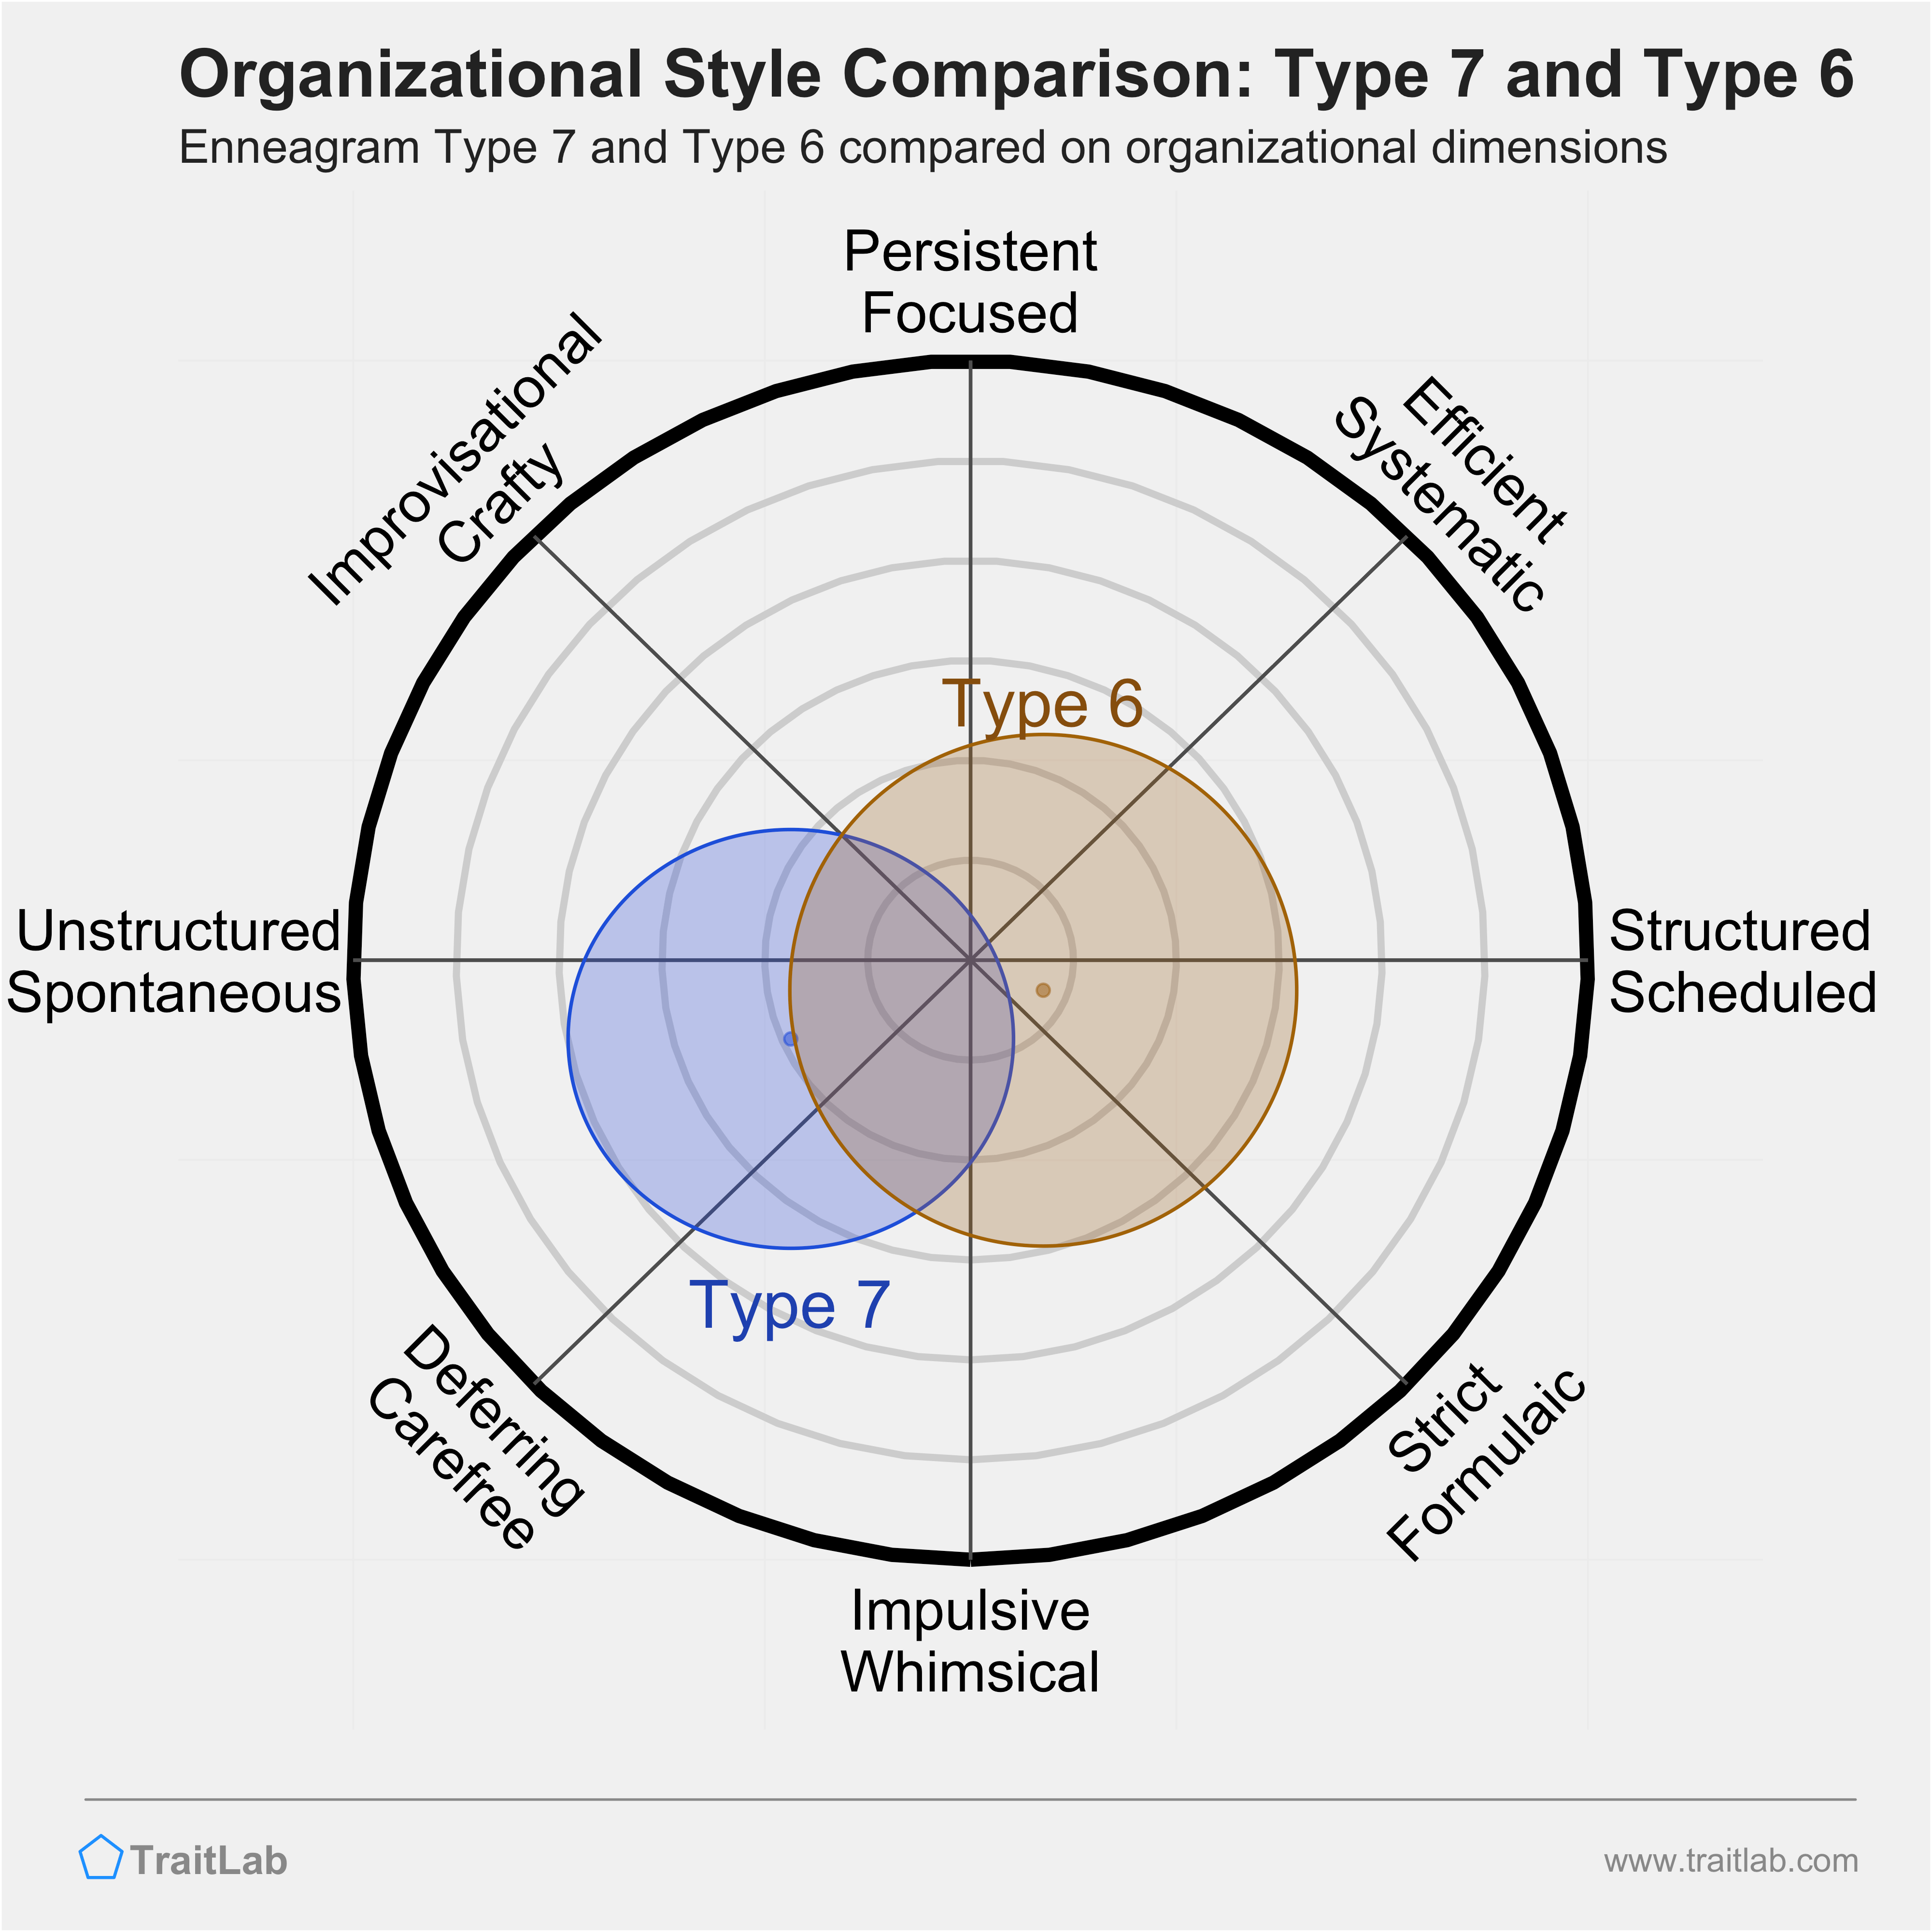 Type 7 and Type 6 comparison across organizational dimensions